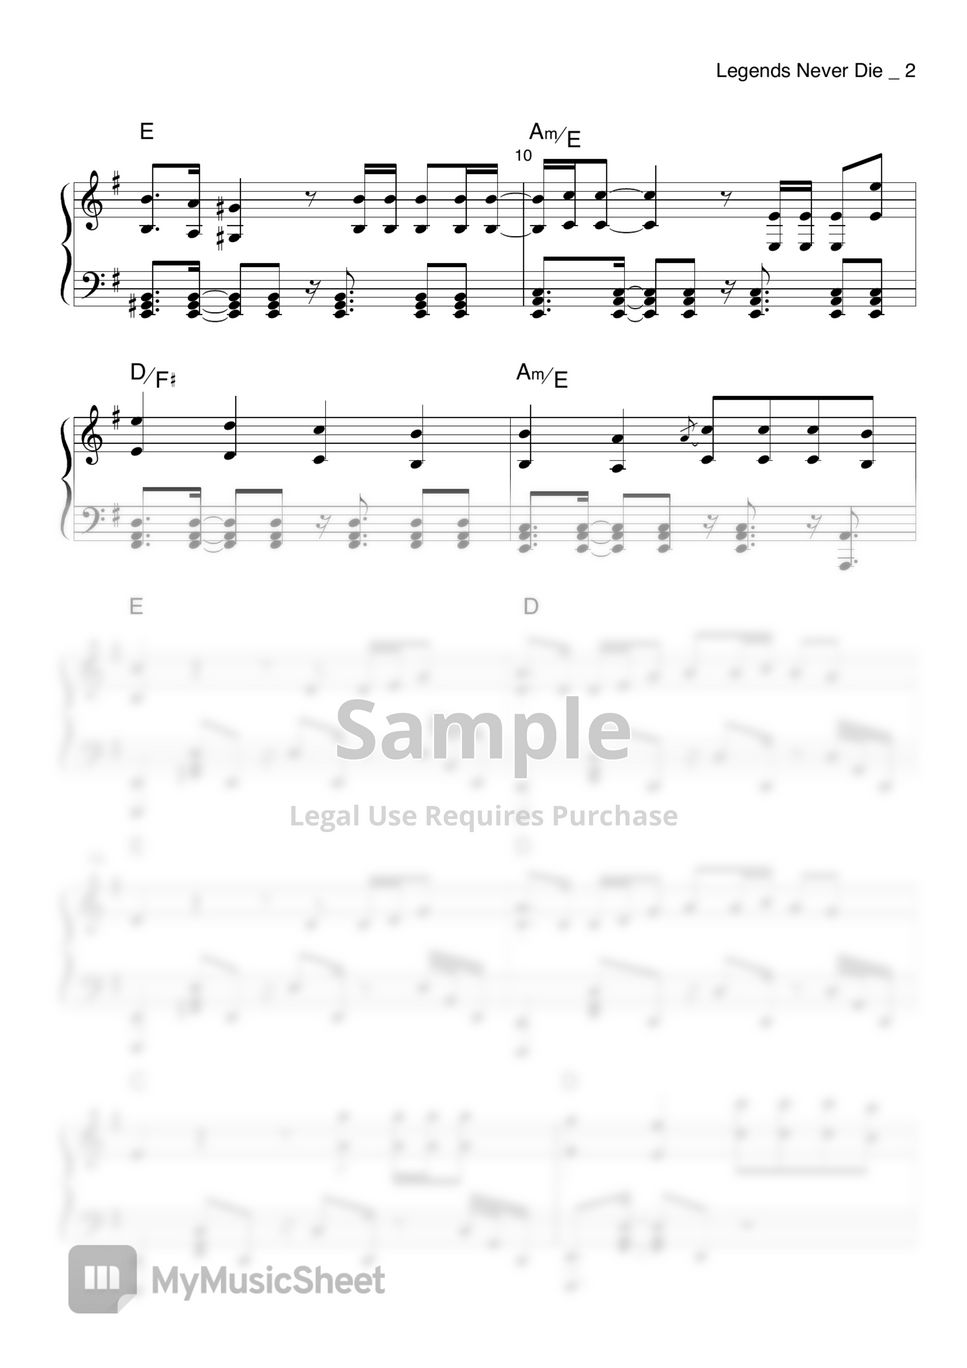 Legends Never Die – League of Legends [With All Instruments] Sheet